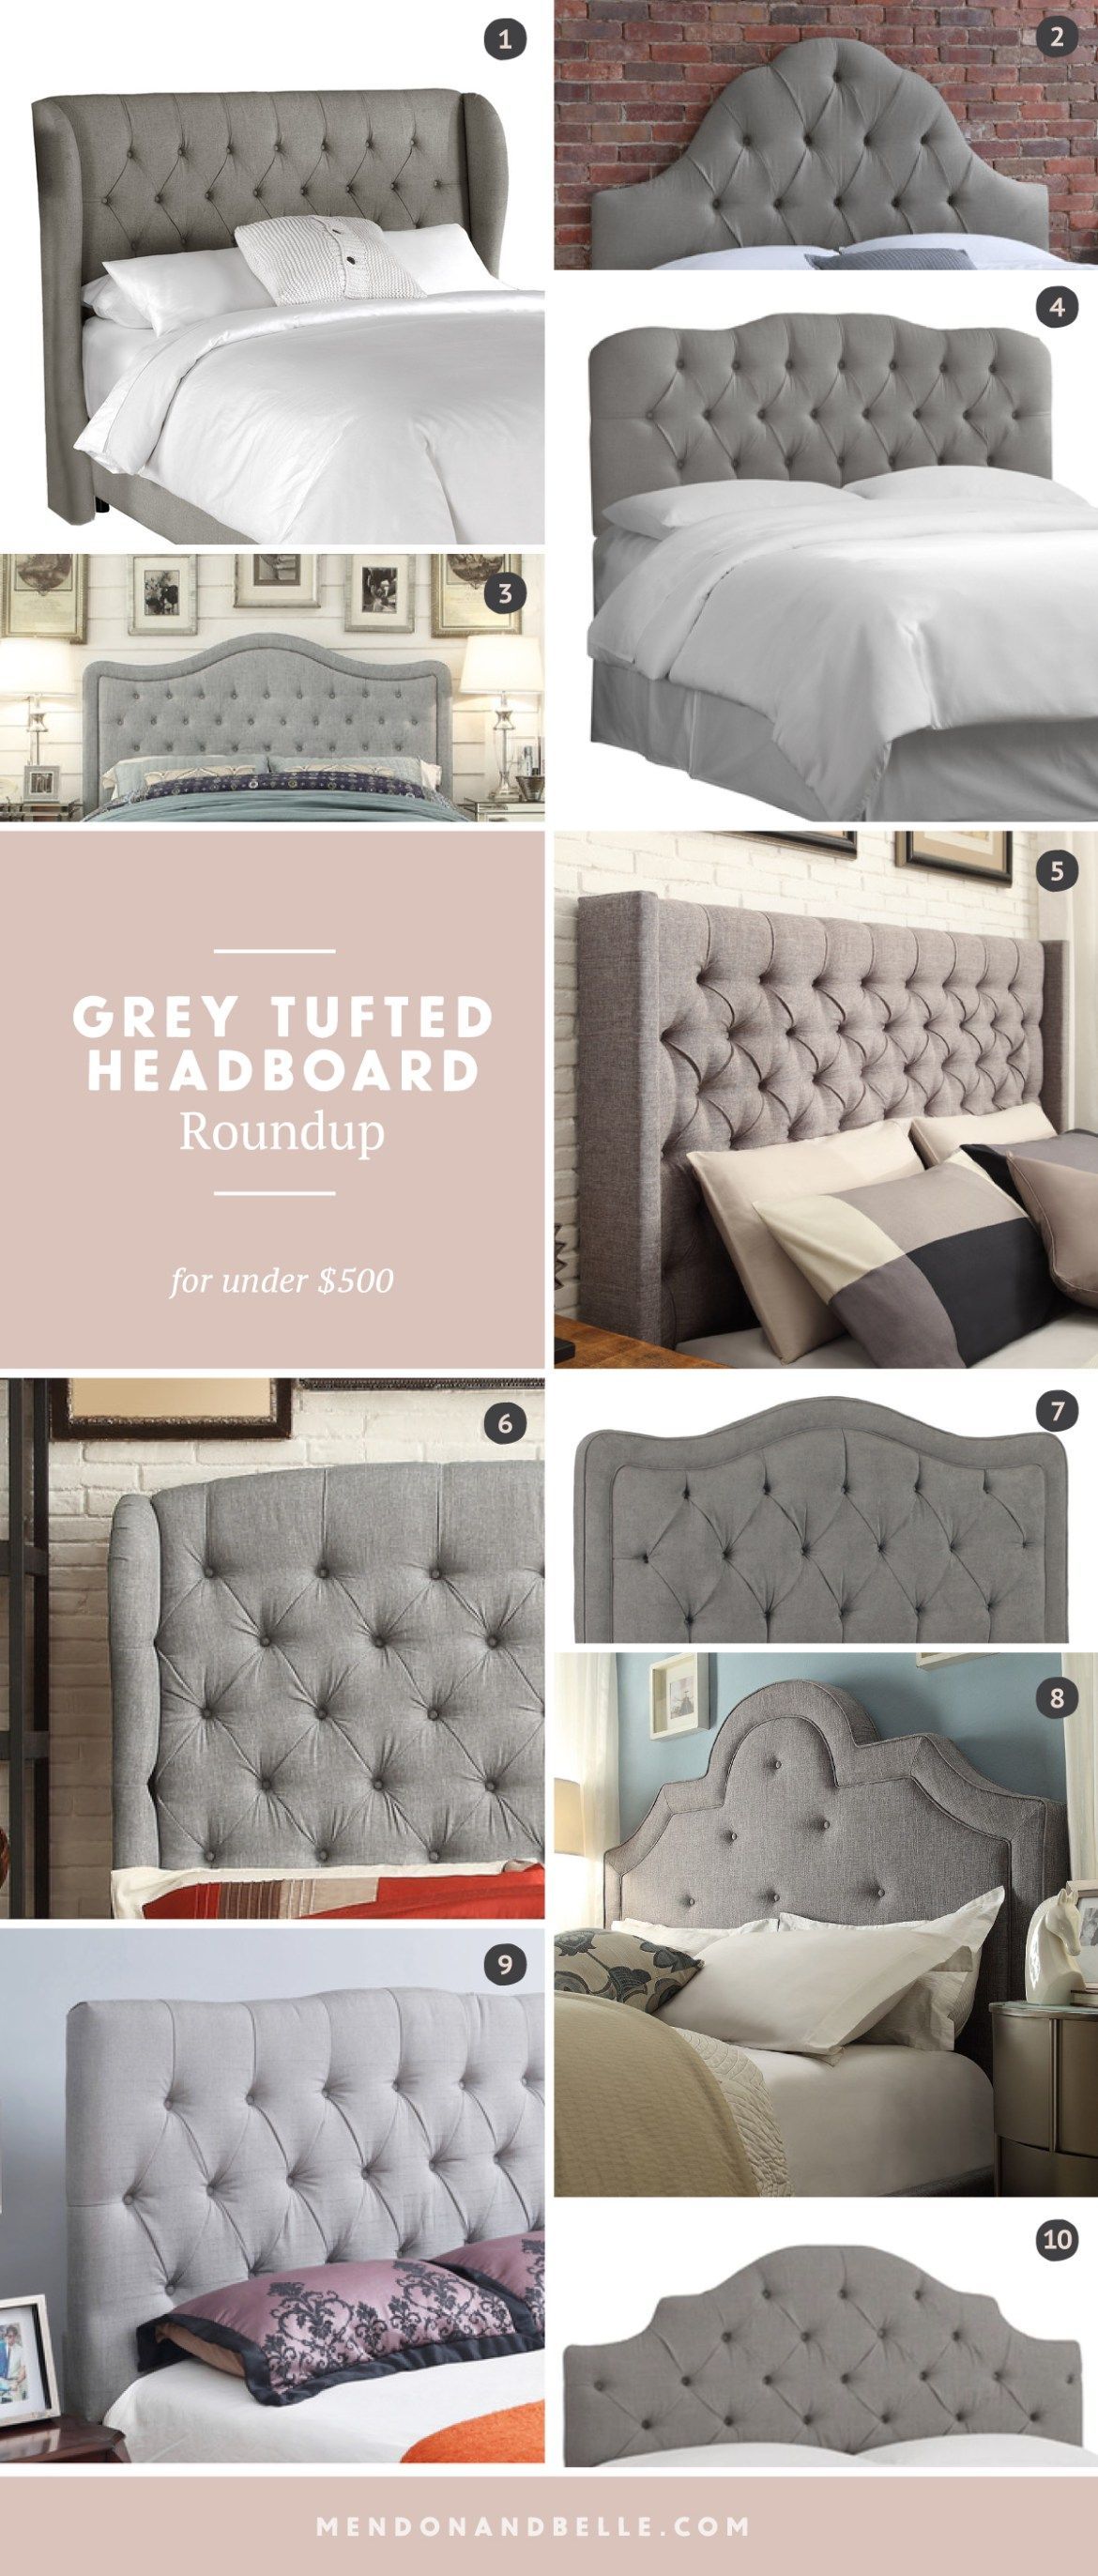 Grey Tufted Headboard Roundup for under $500 -   21 diy projects For Bedroom tufted headboards
 ideas